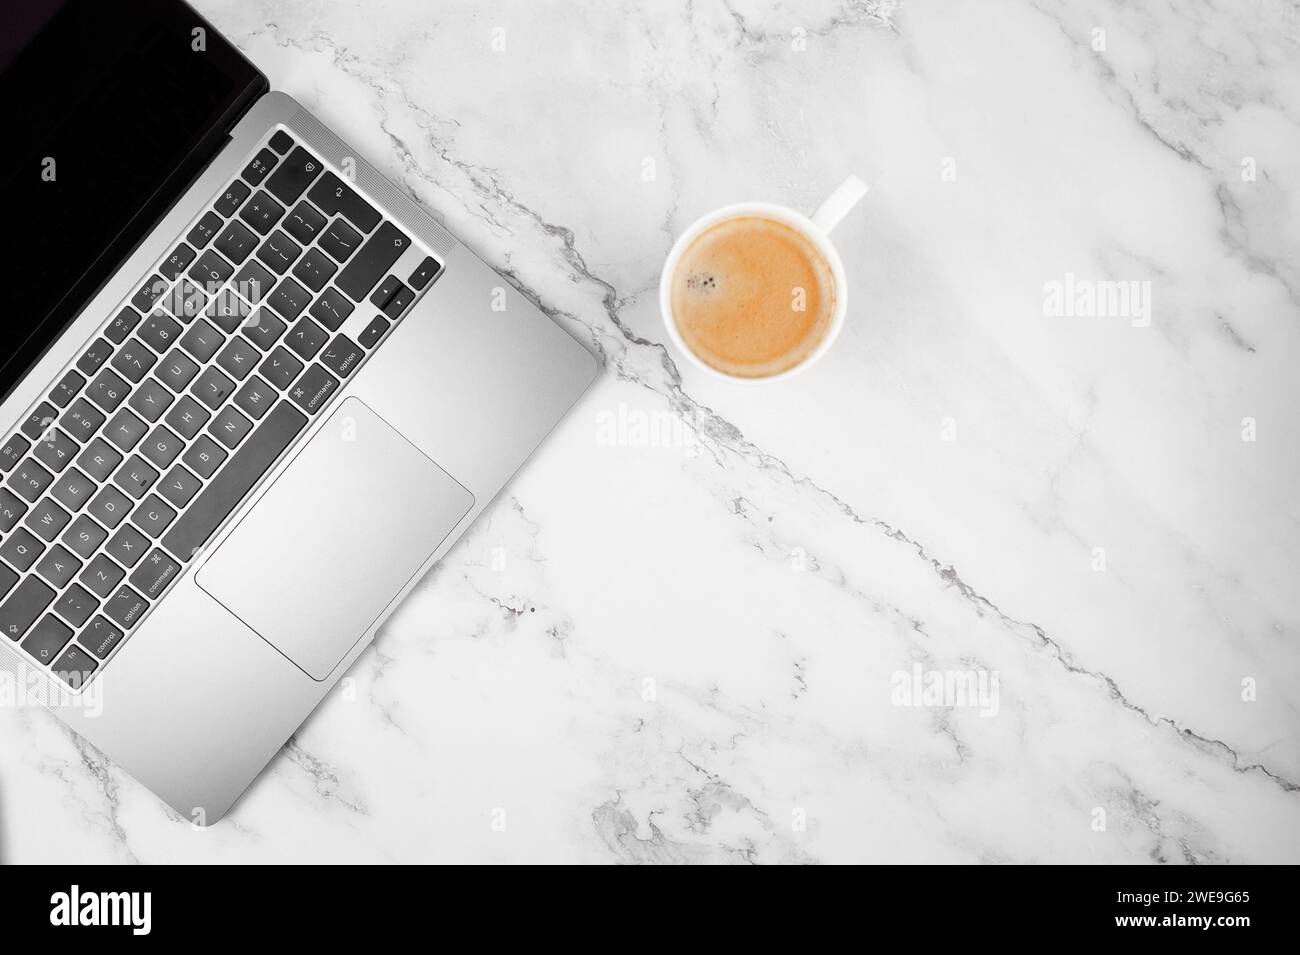 Top view of grey laptop computer on white marble background. Coffee cup, flat lay, copy space. Stock Photo